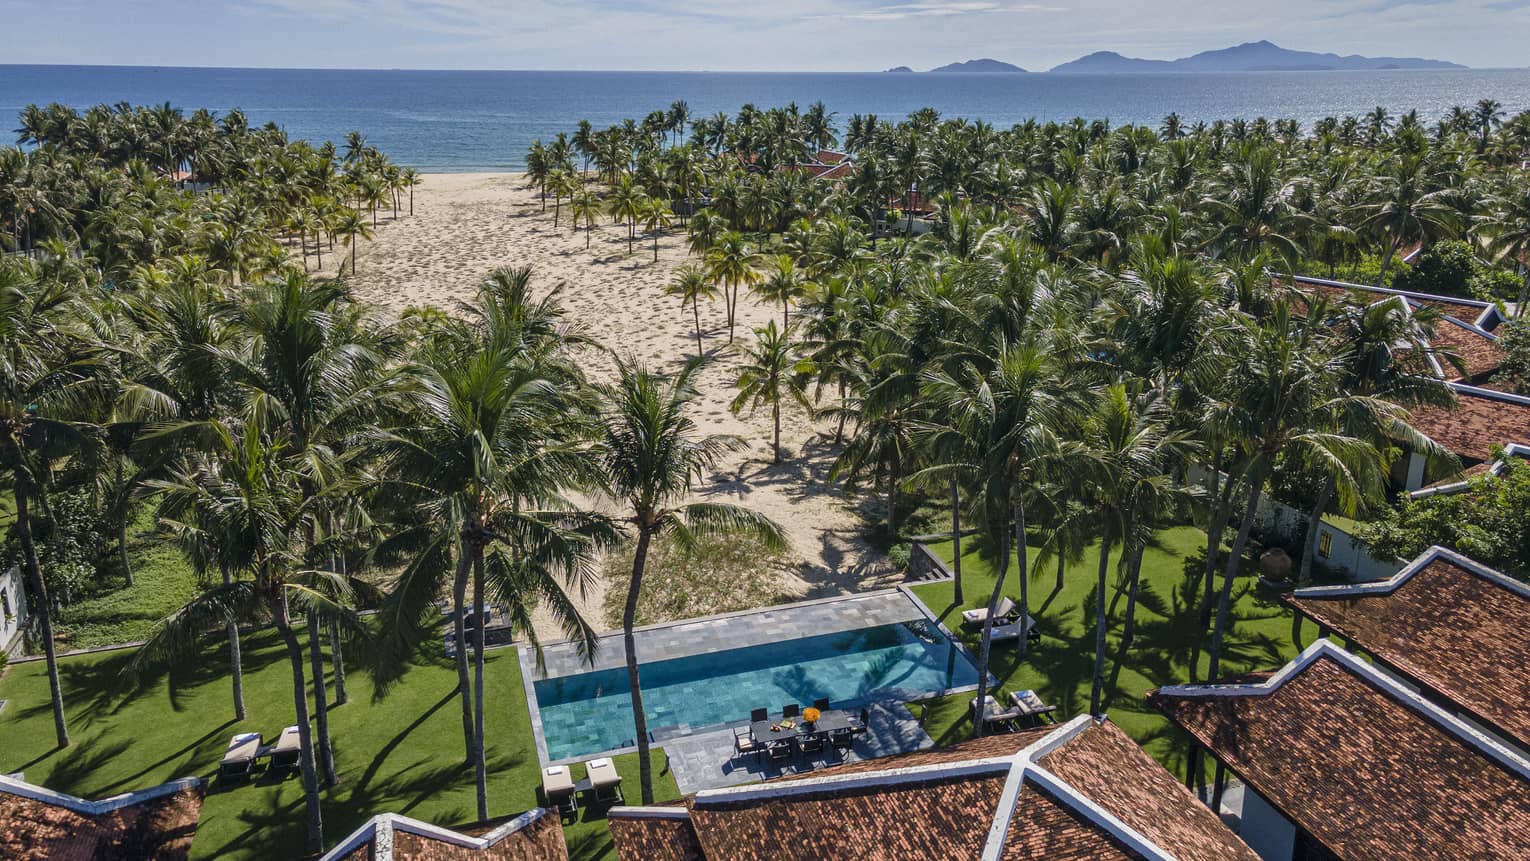 Four Bedroom Pool Villa aerial shot with ocean and mountain views, palm trees and blue skies